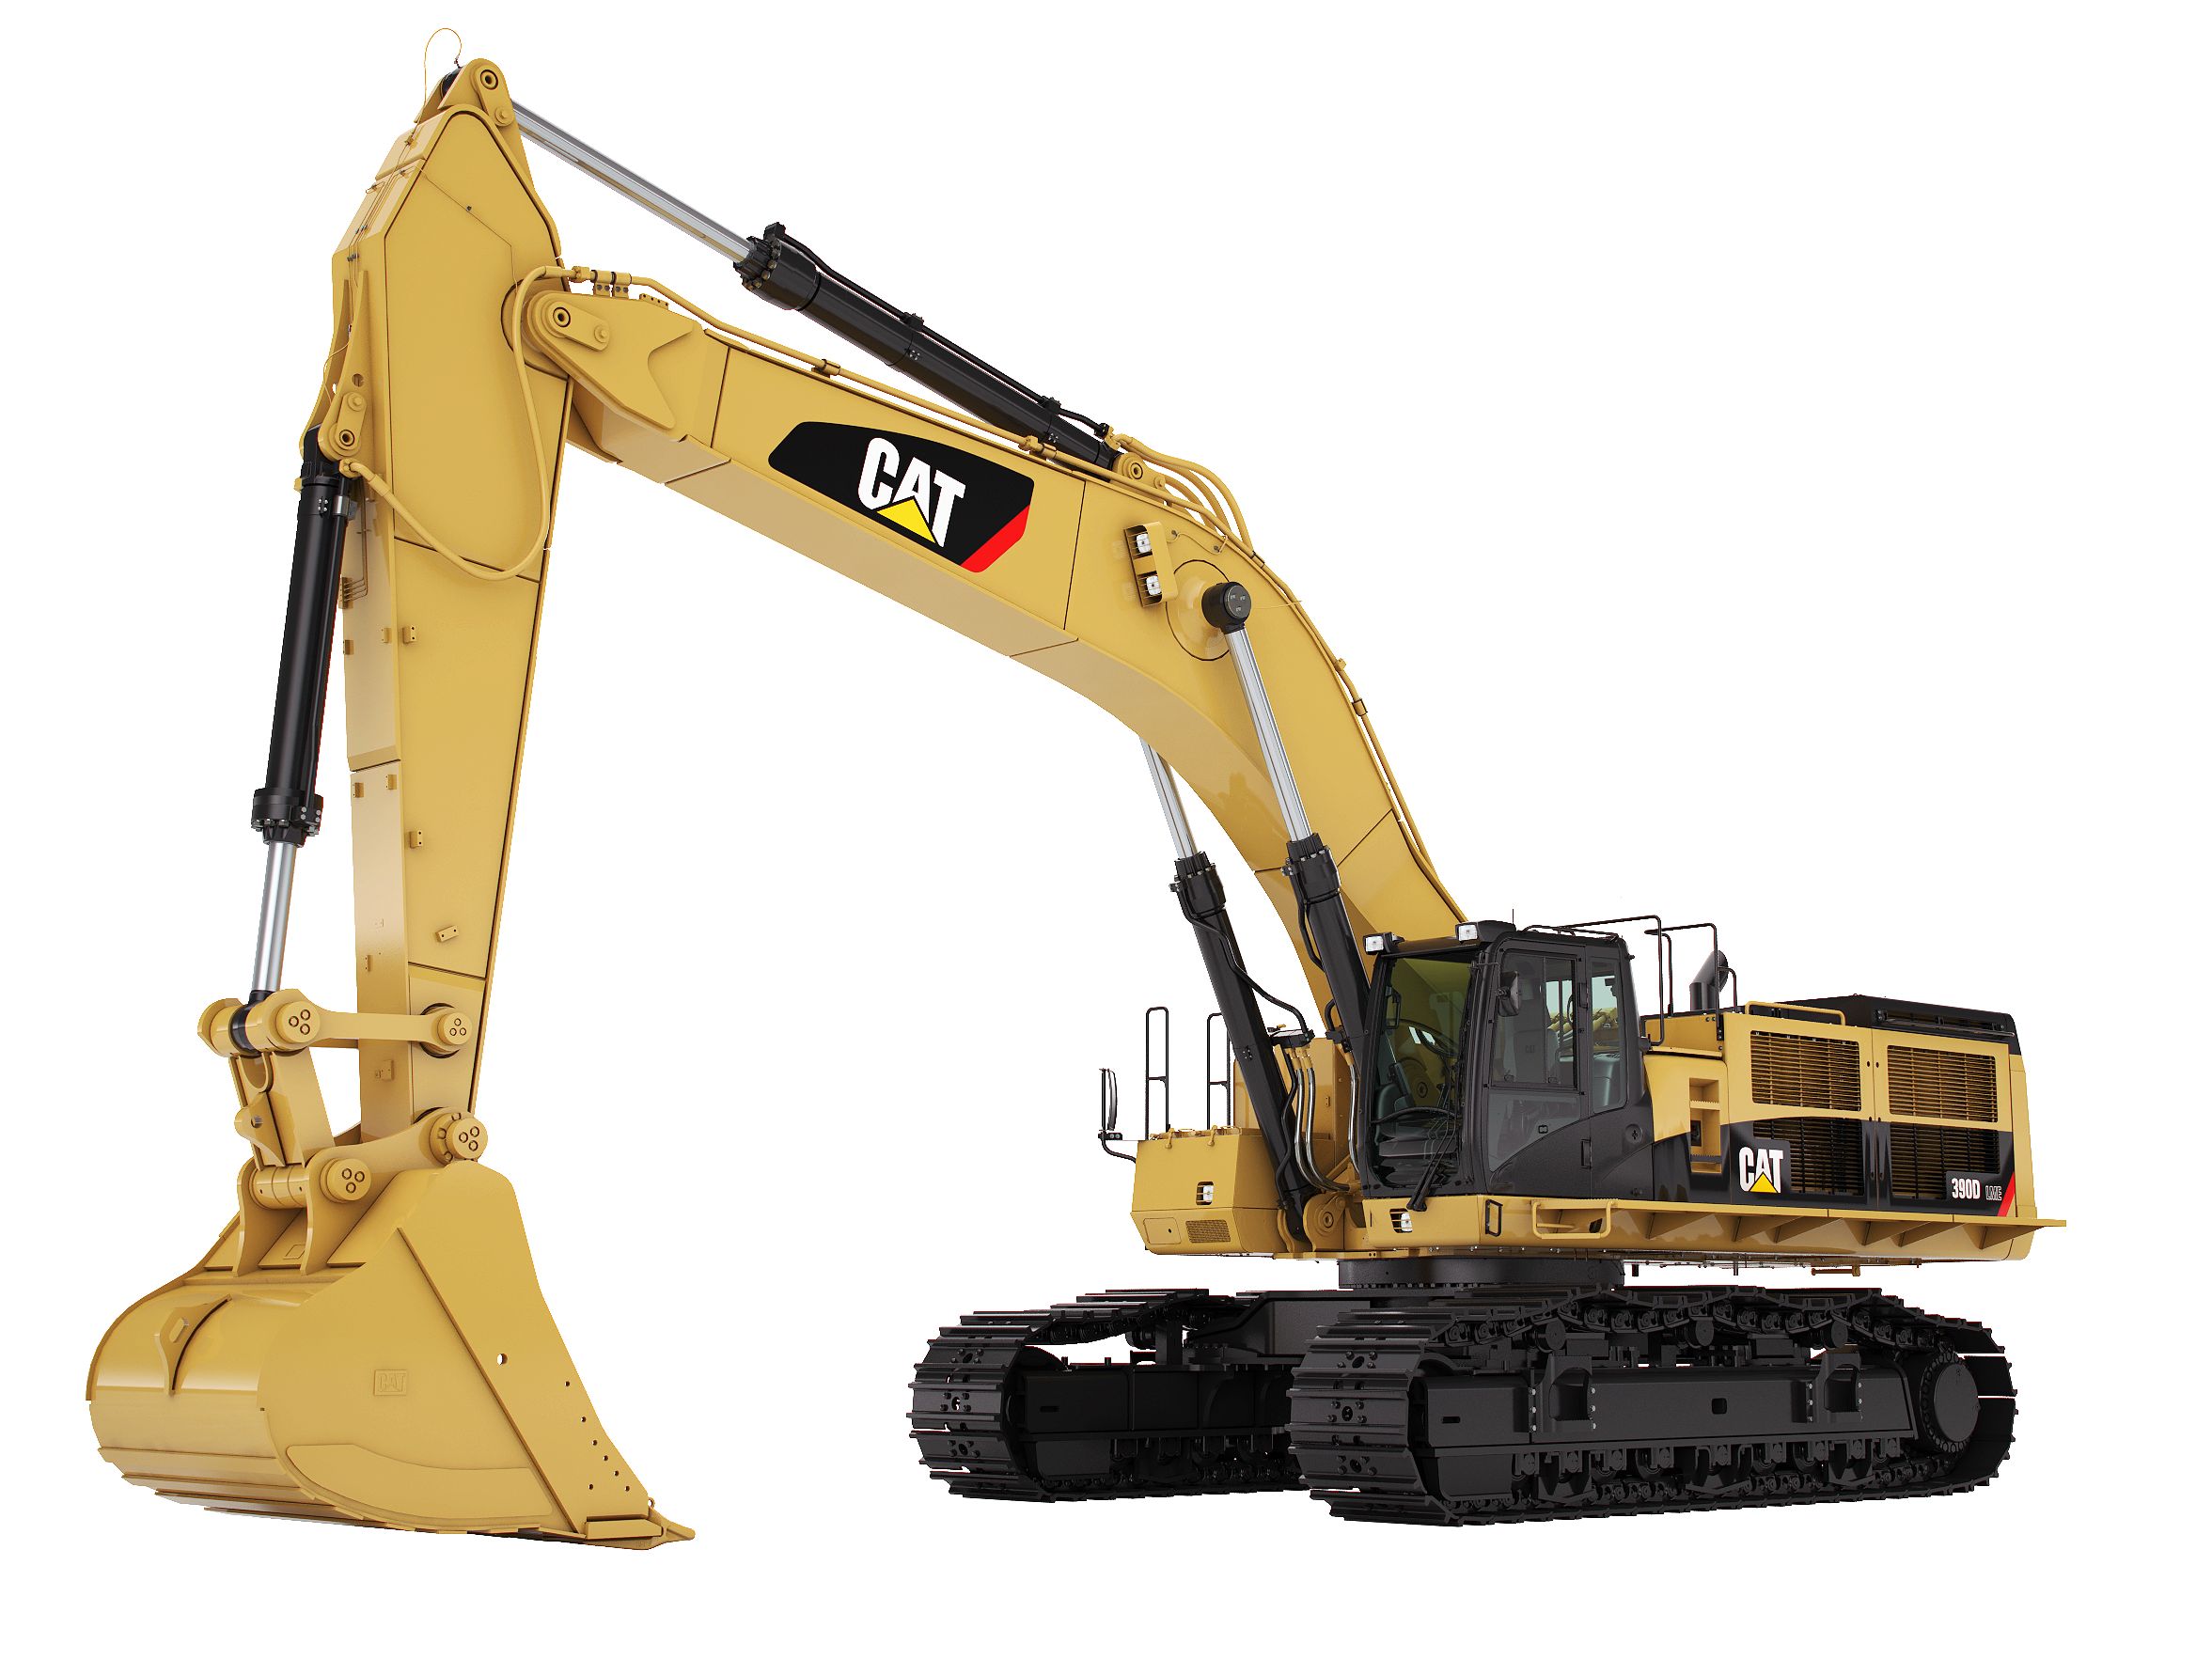 product-390D L Large Hydraulic Excavator